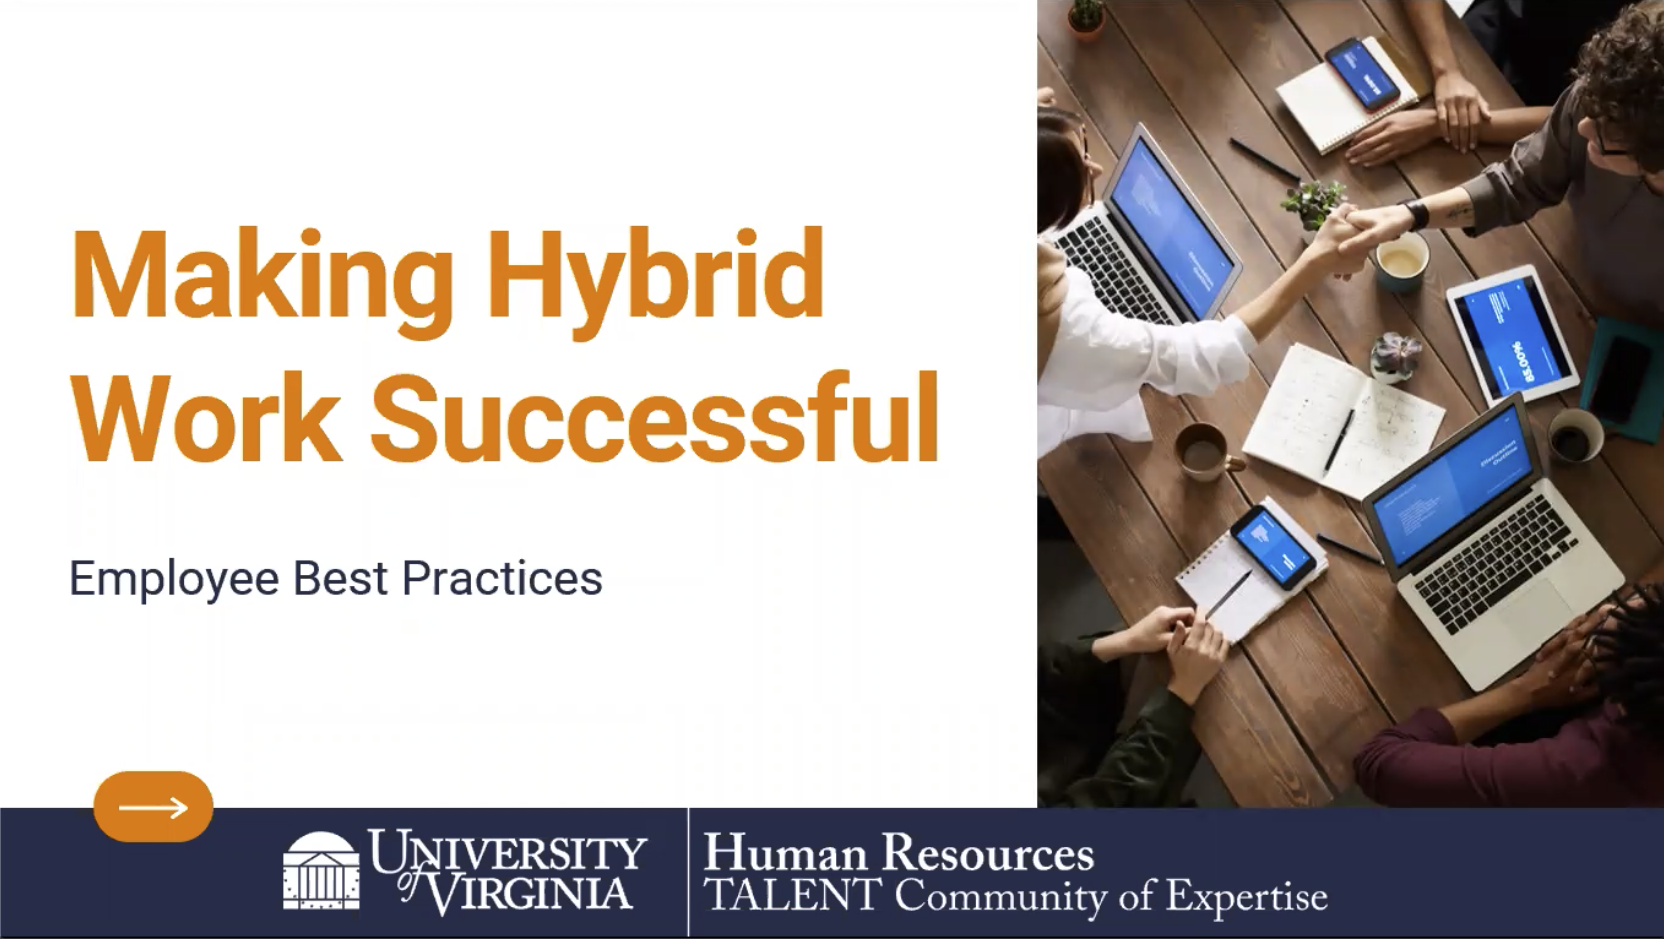 Video about Making Hybrid Work Successful